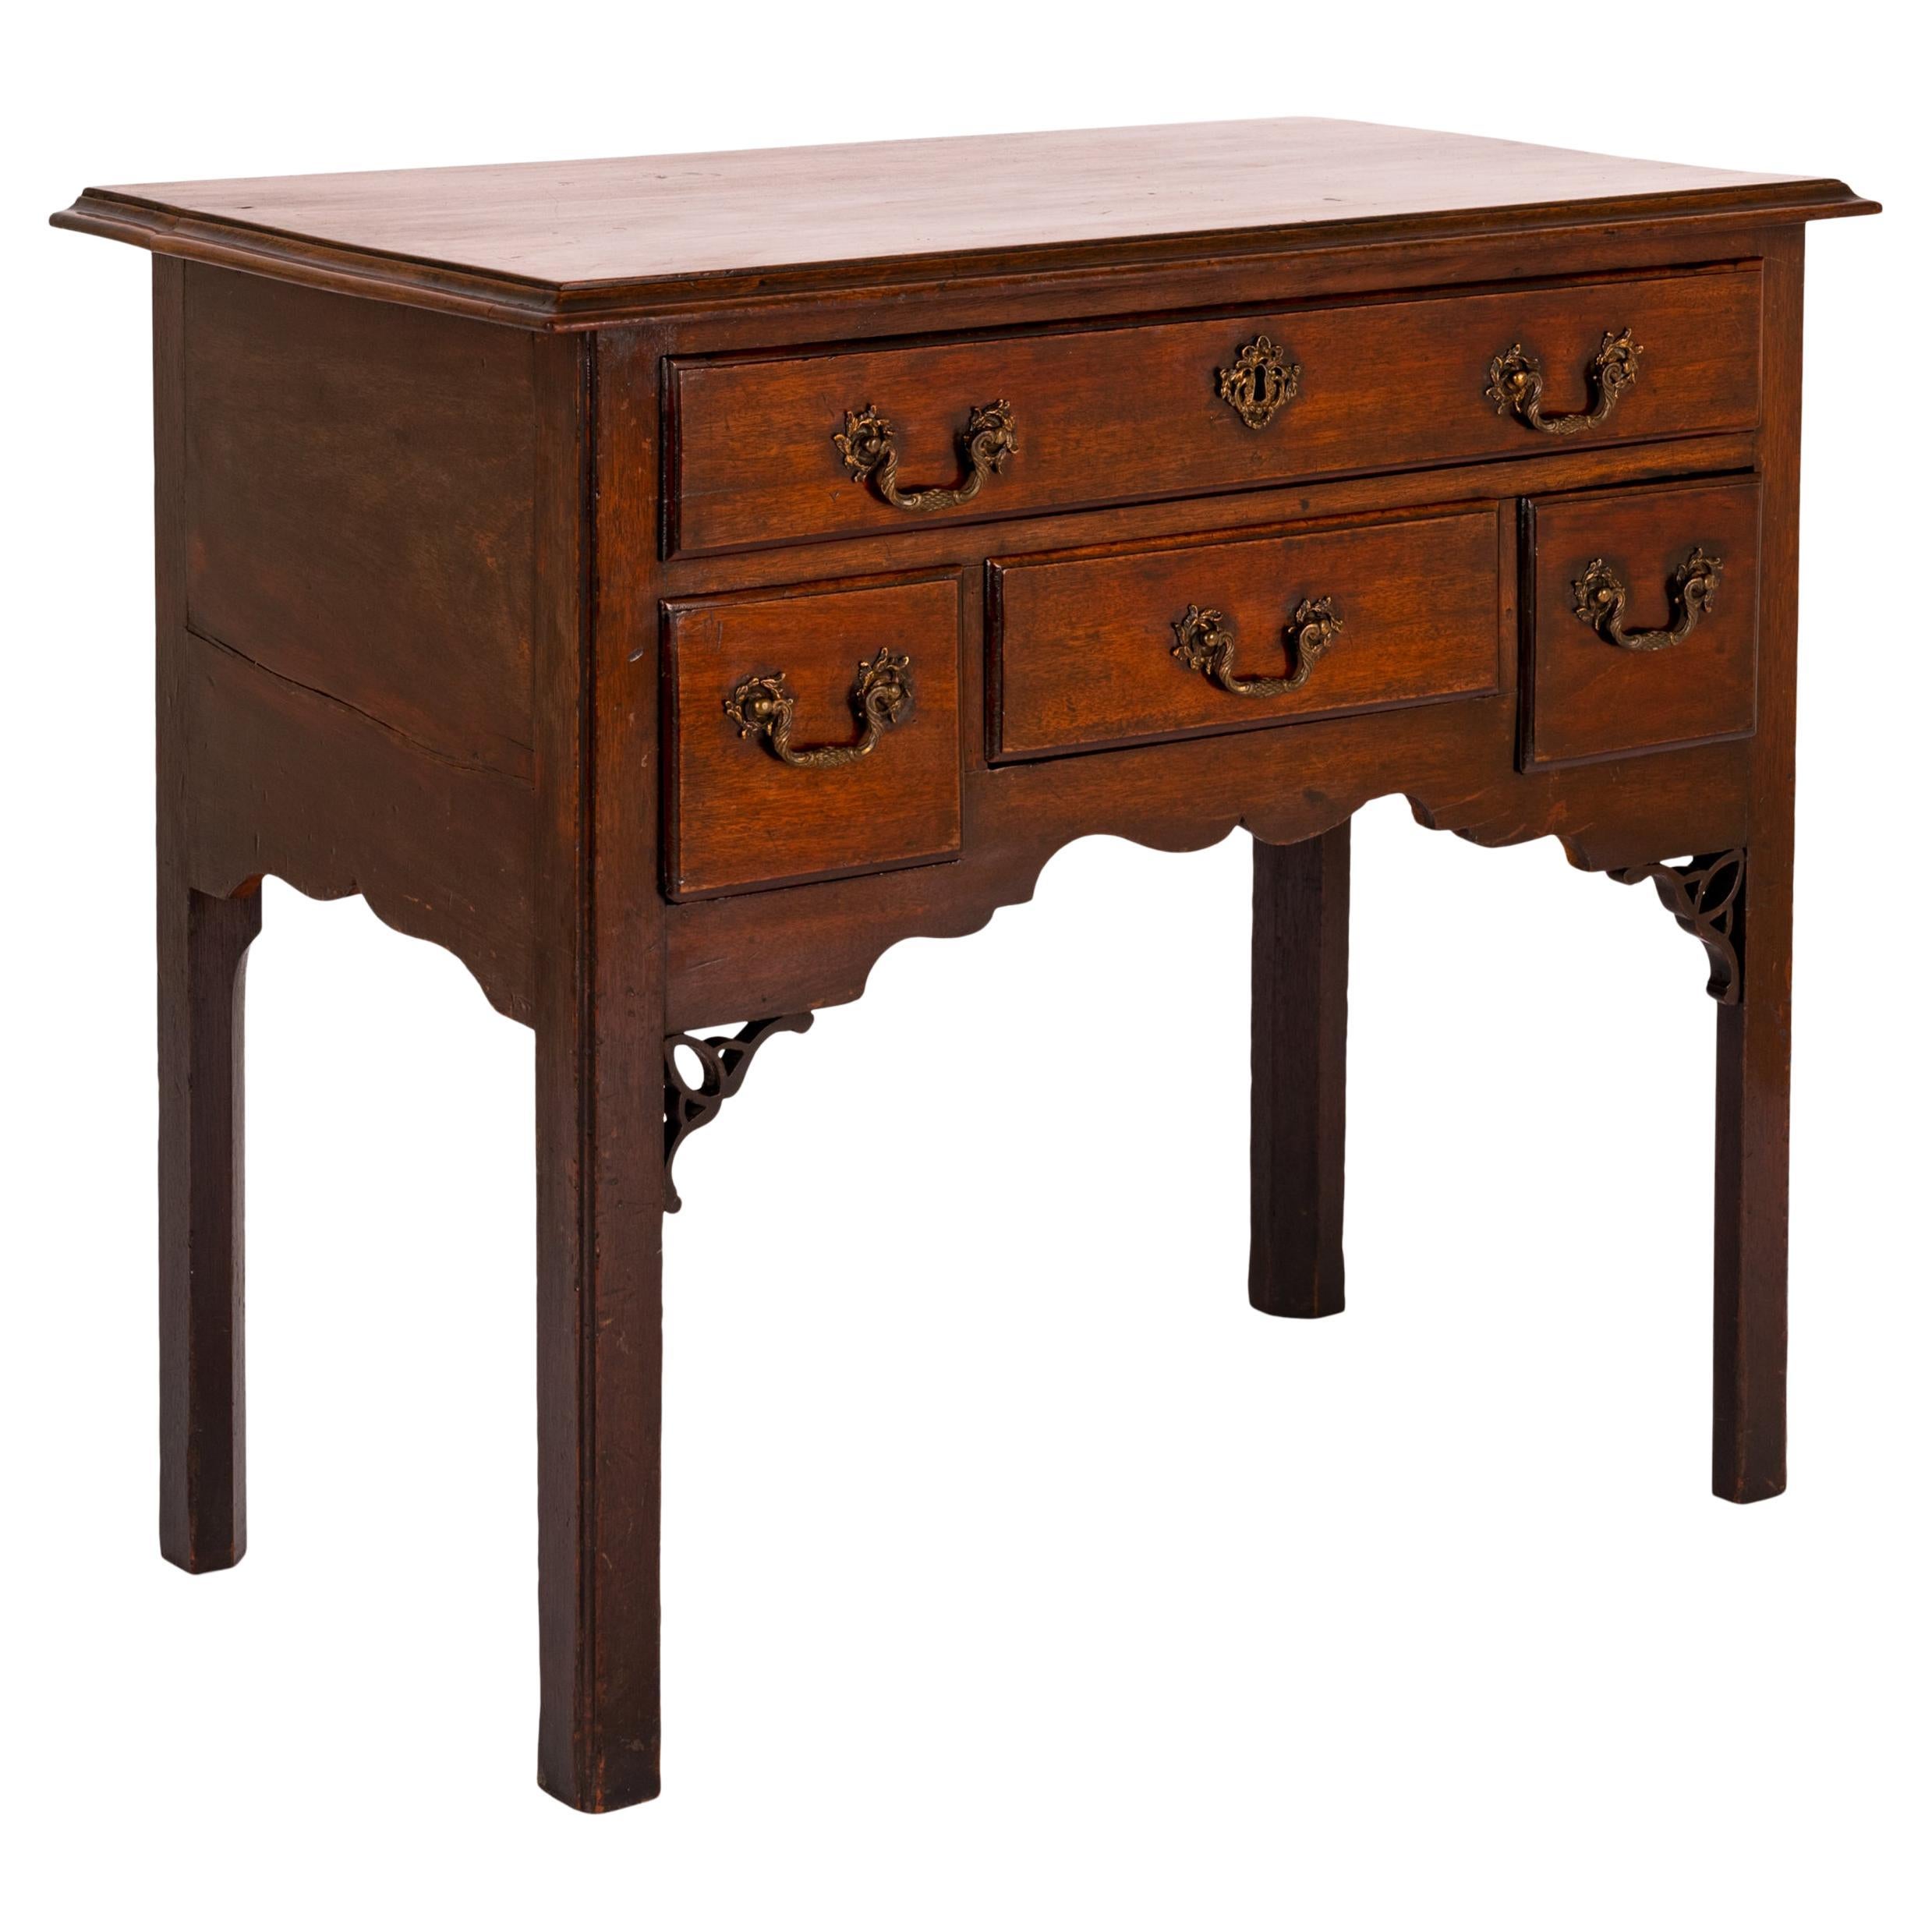 George II Antique English 18th C Georgian Mahogany Chippendale Lowboy Side Table 1750 For Sale